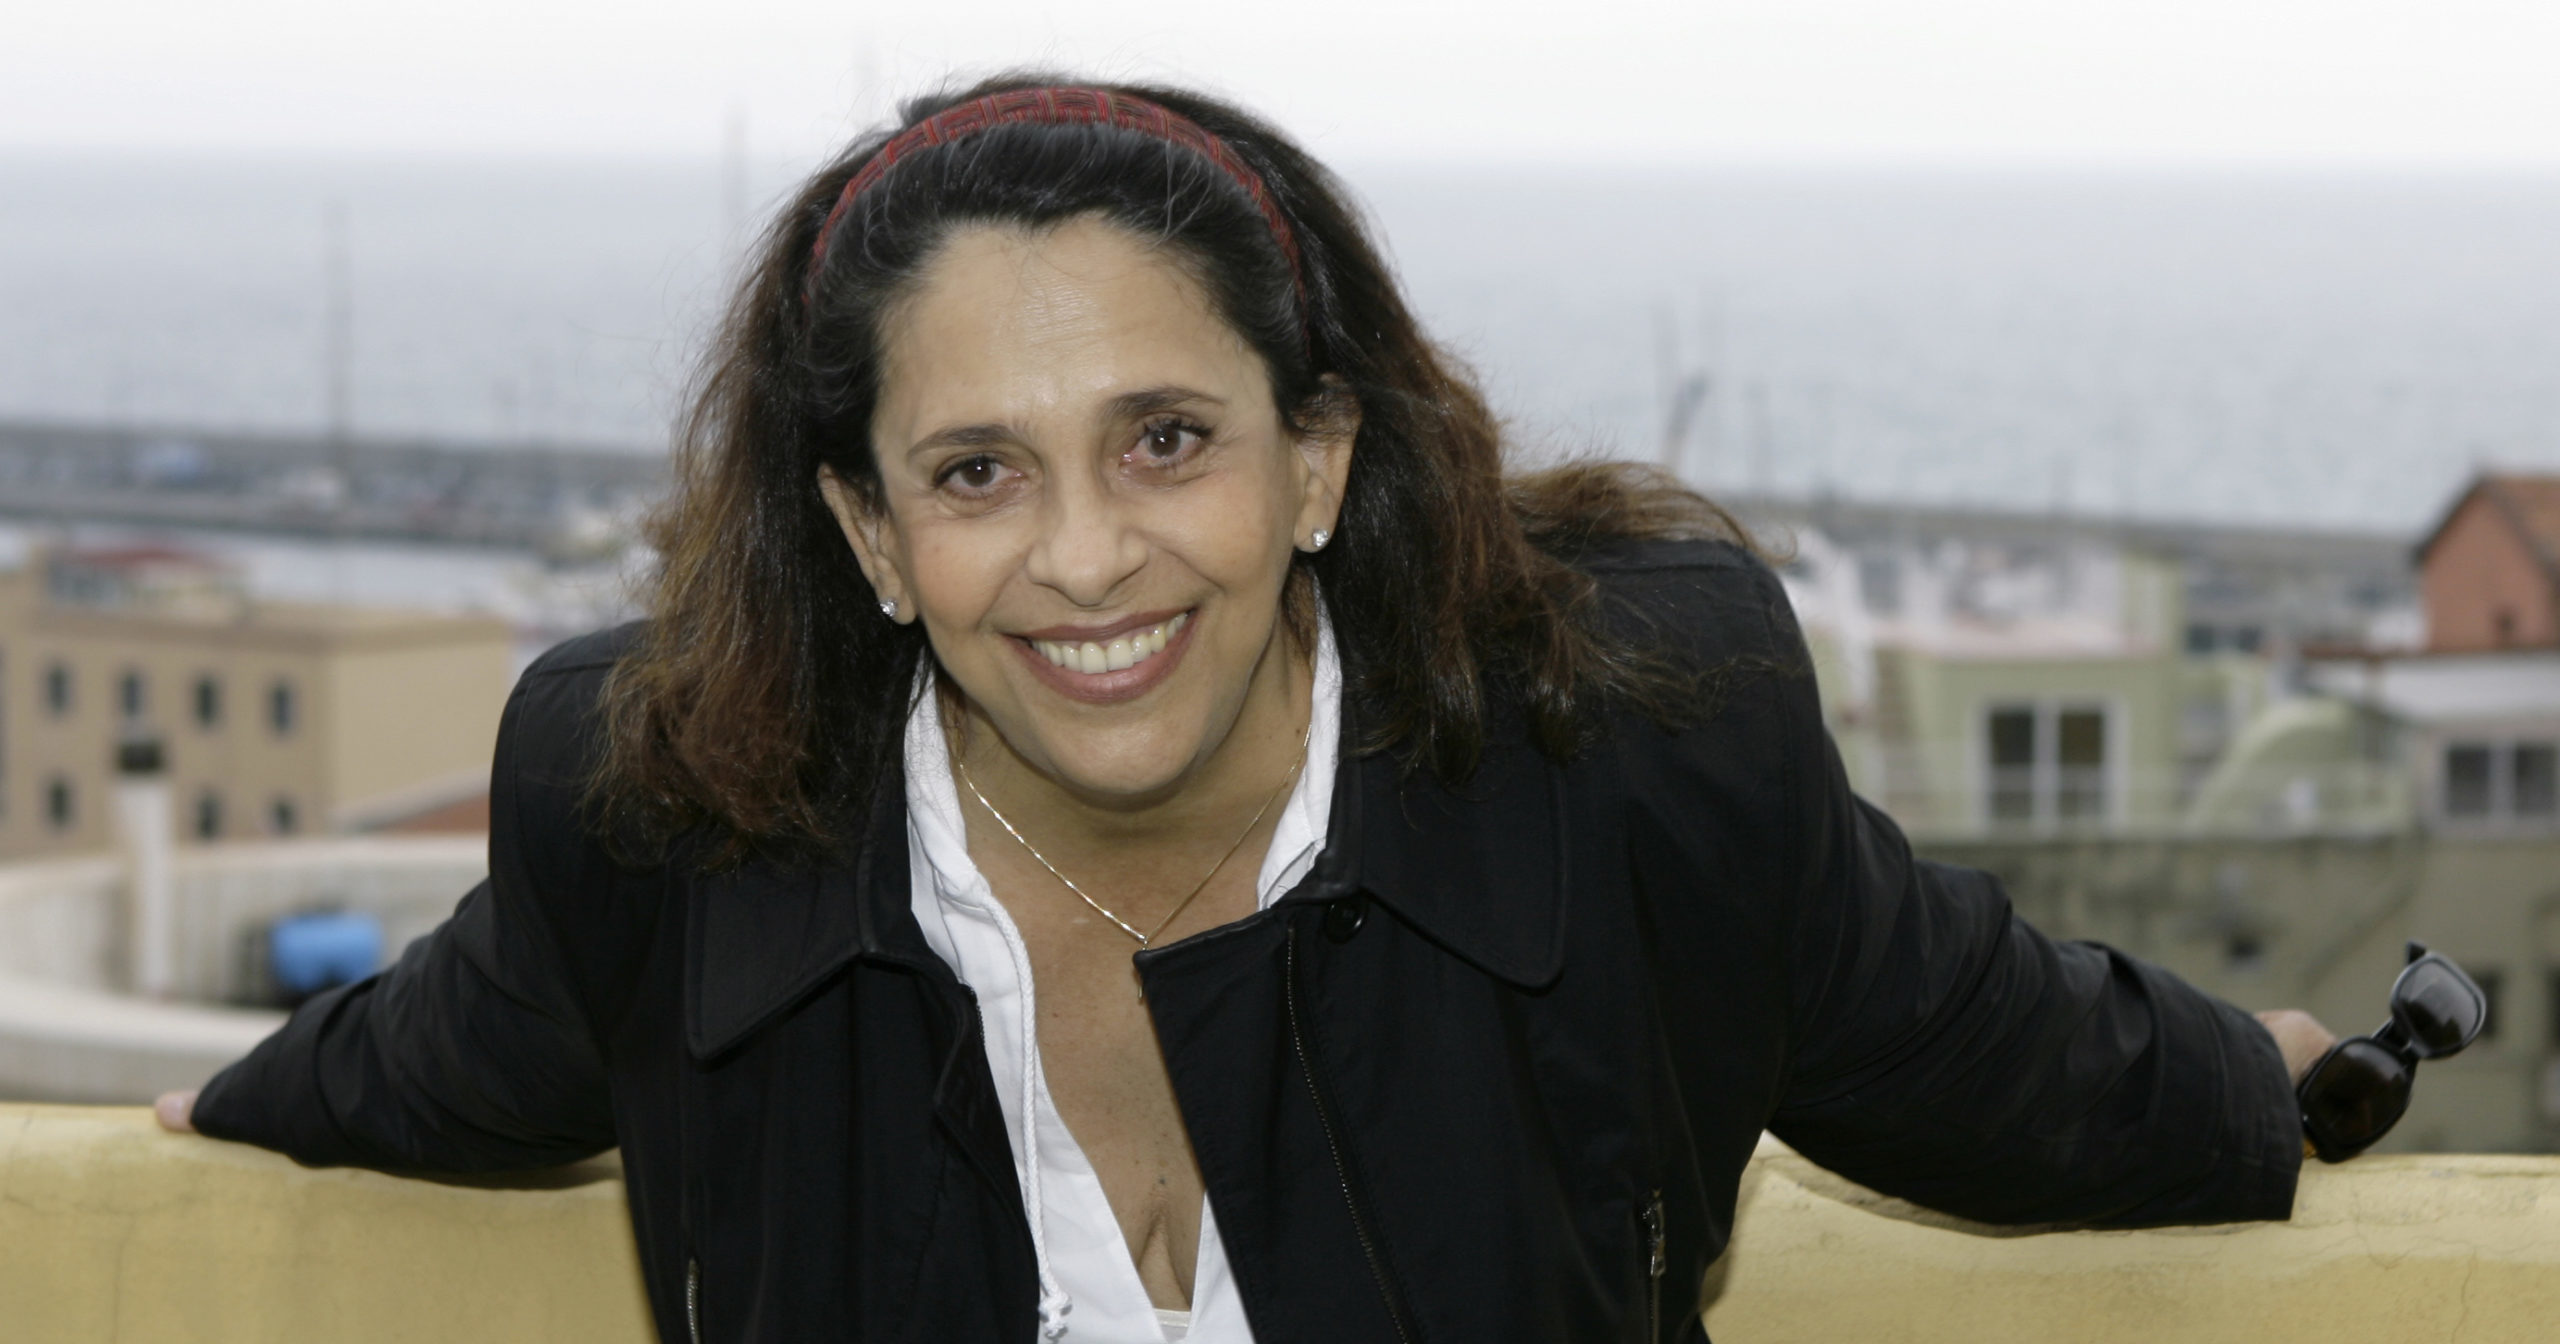 Brazilian singer Gal Costa poses for a news conference at the "Festival di Sanremo" Italian song contest in San Remo, Italy, on Feb. 27, 2008.